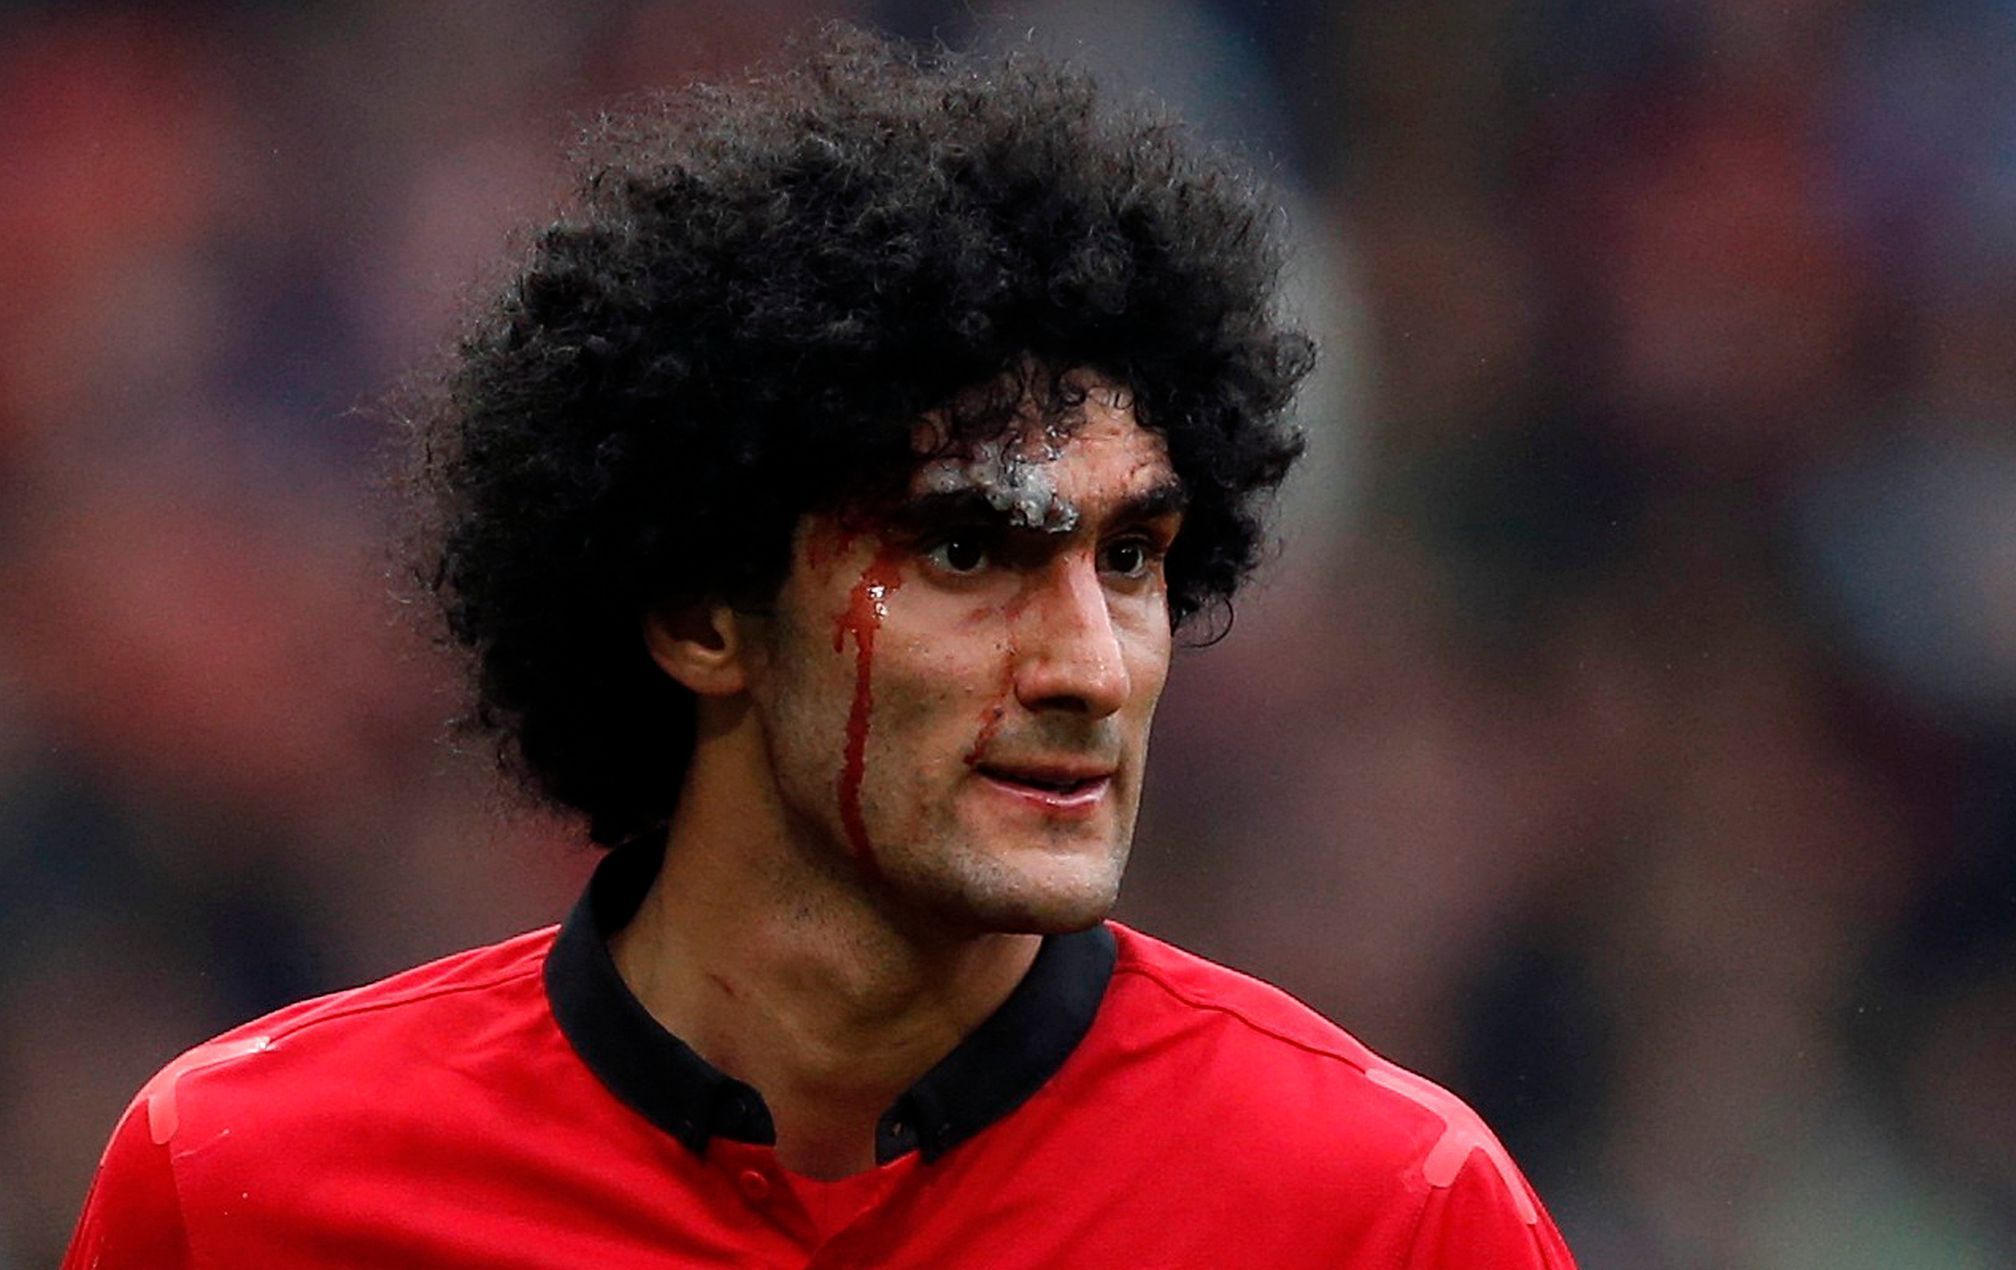 Manchester United's Fellaini bleeds from a head injury during their English Premier League soccer match against Liverpool in Manchester